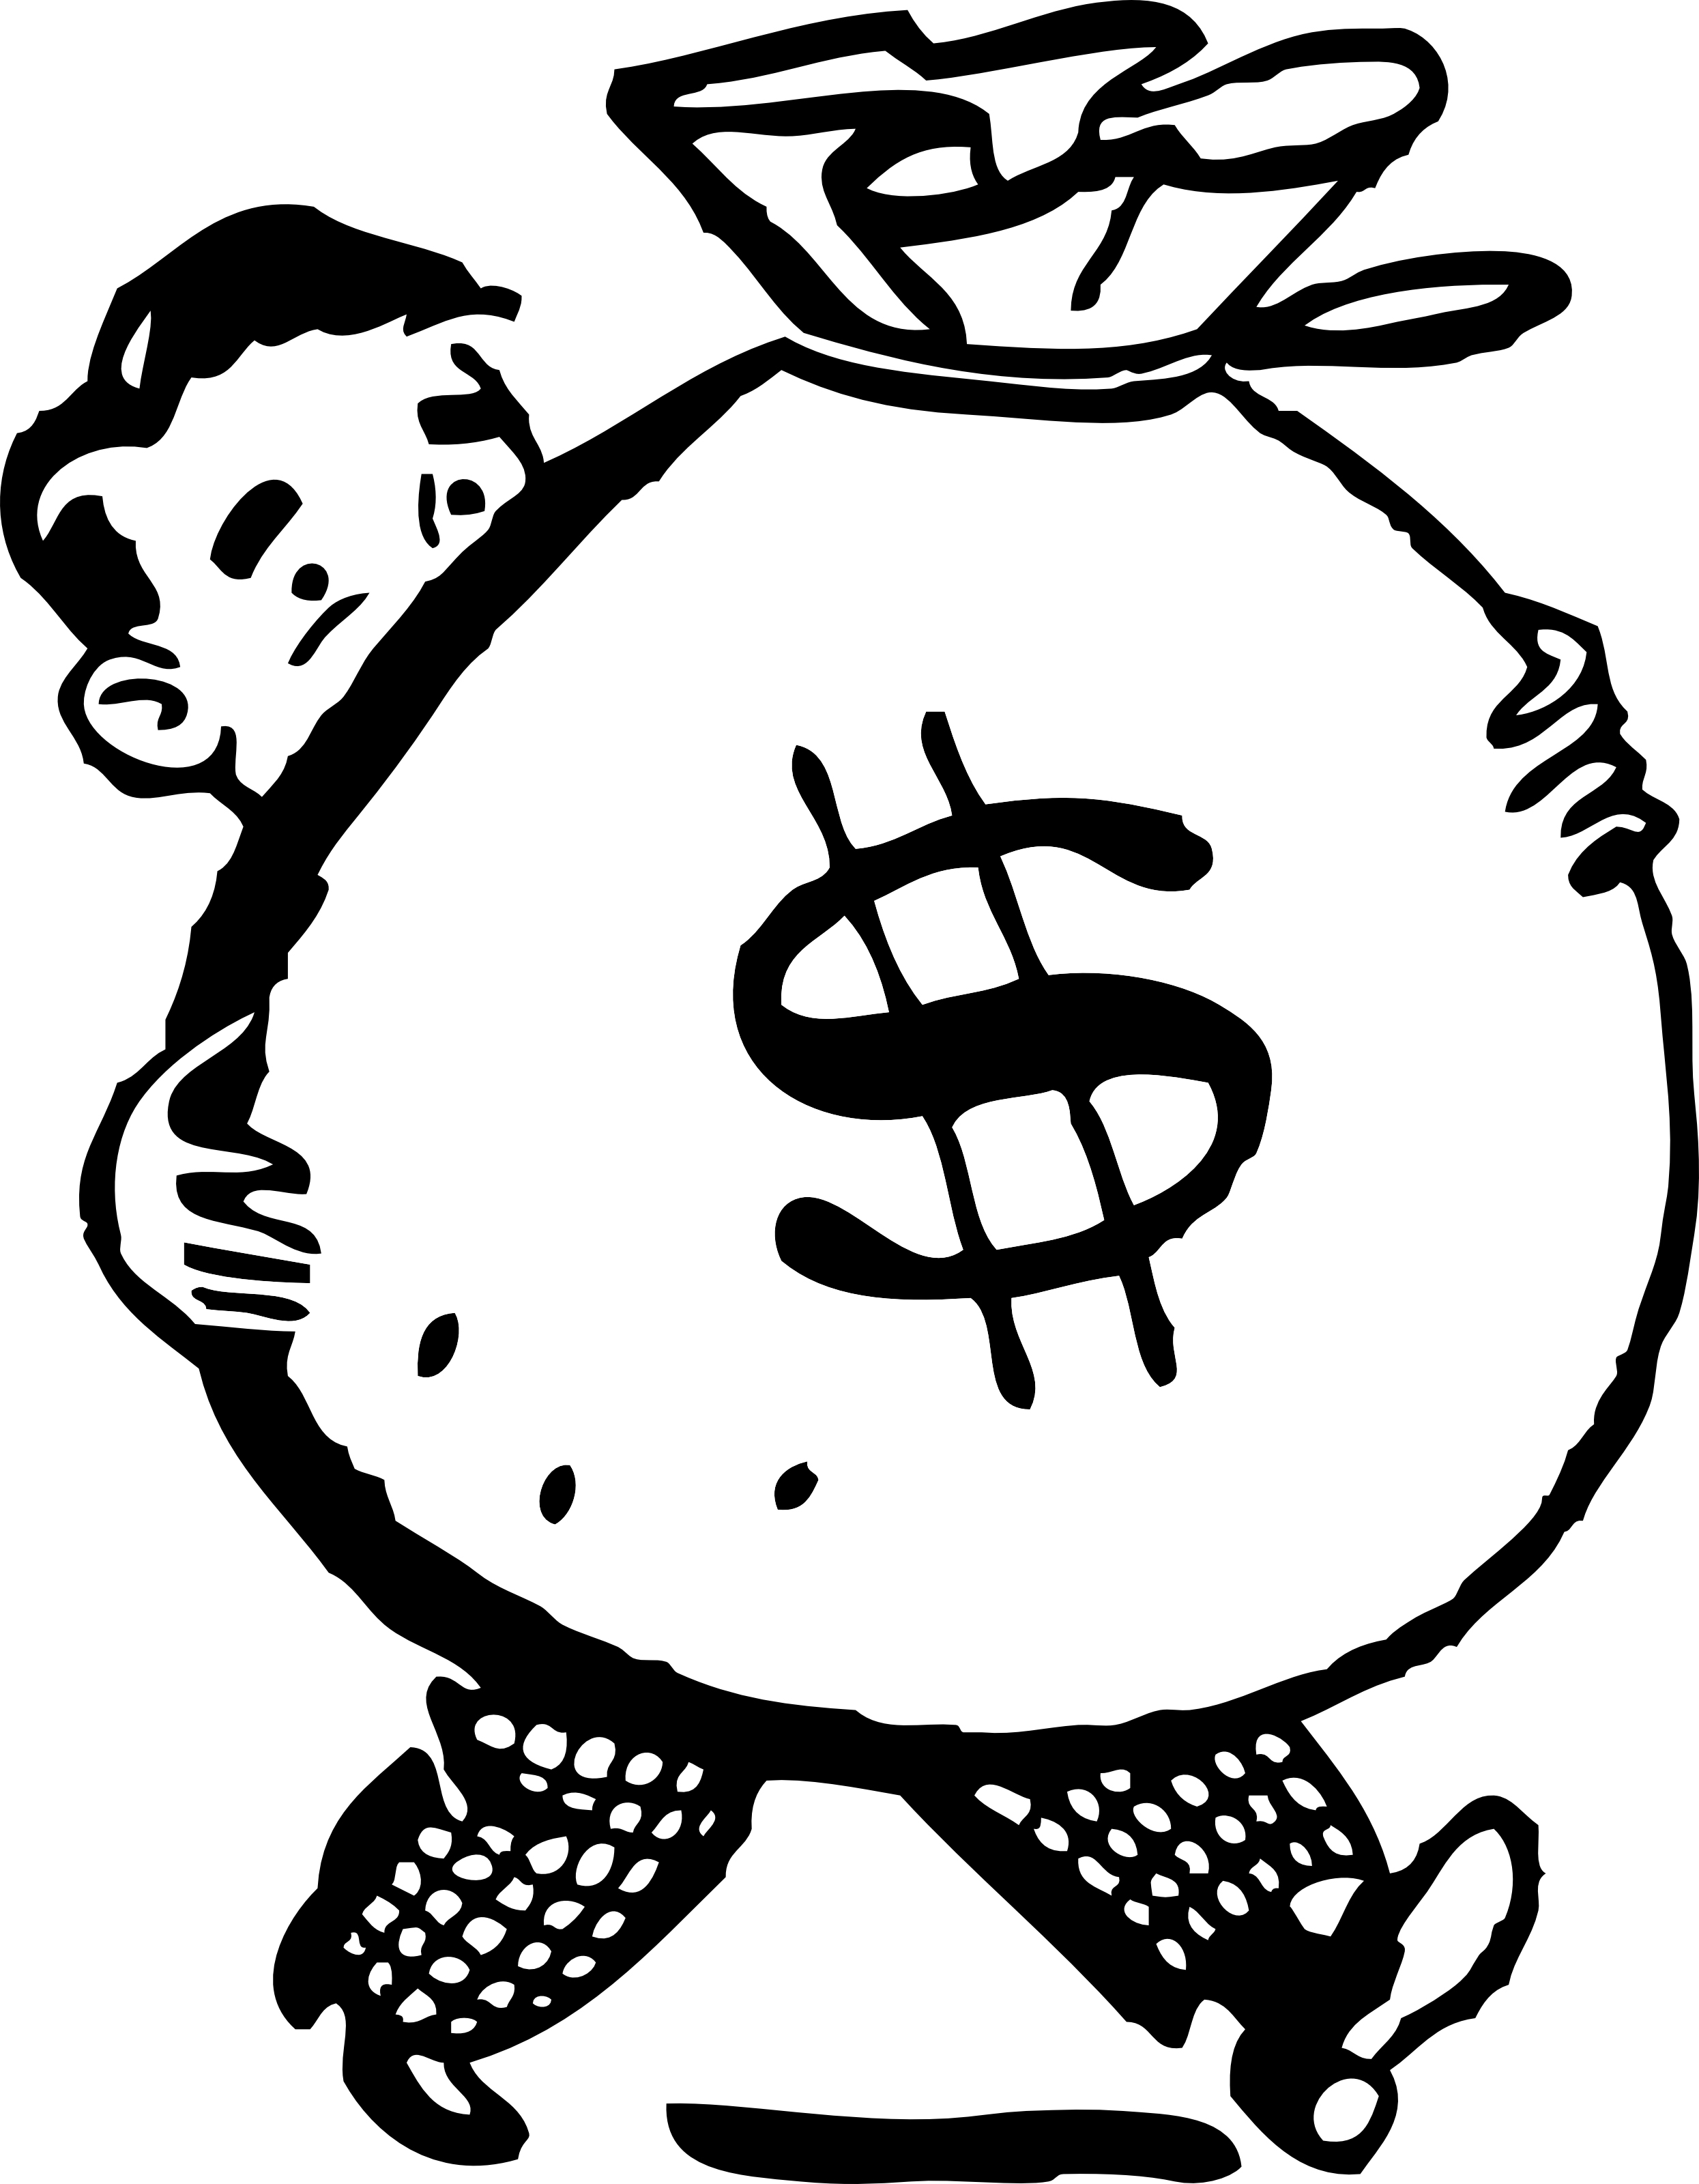 Dollar Sign Clip Art Free - Clipart library